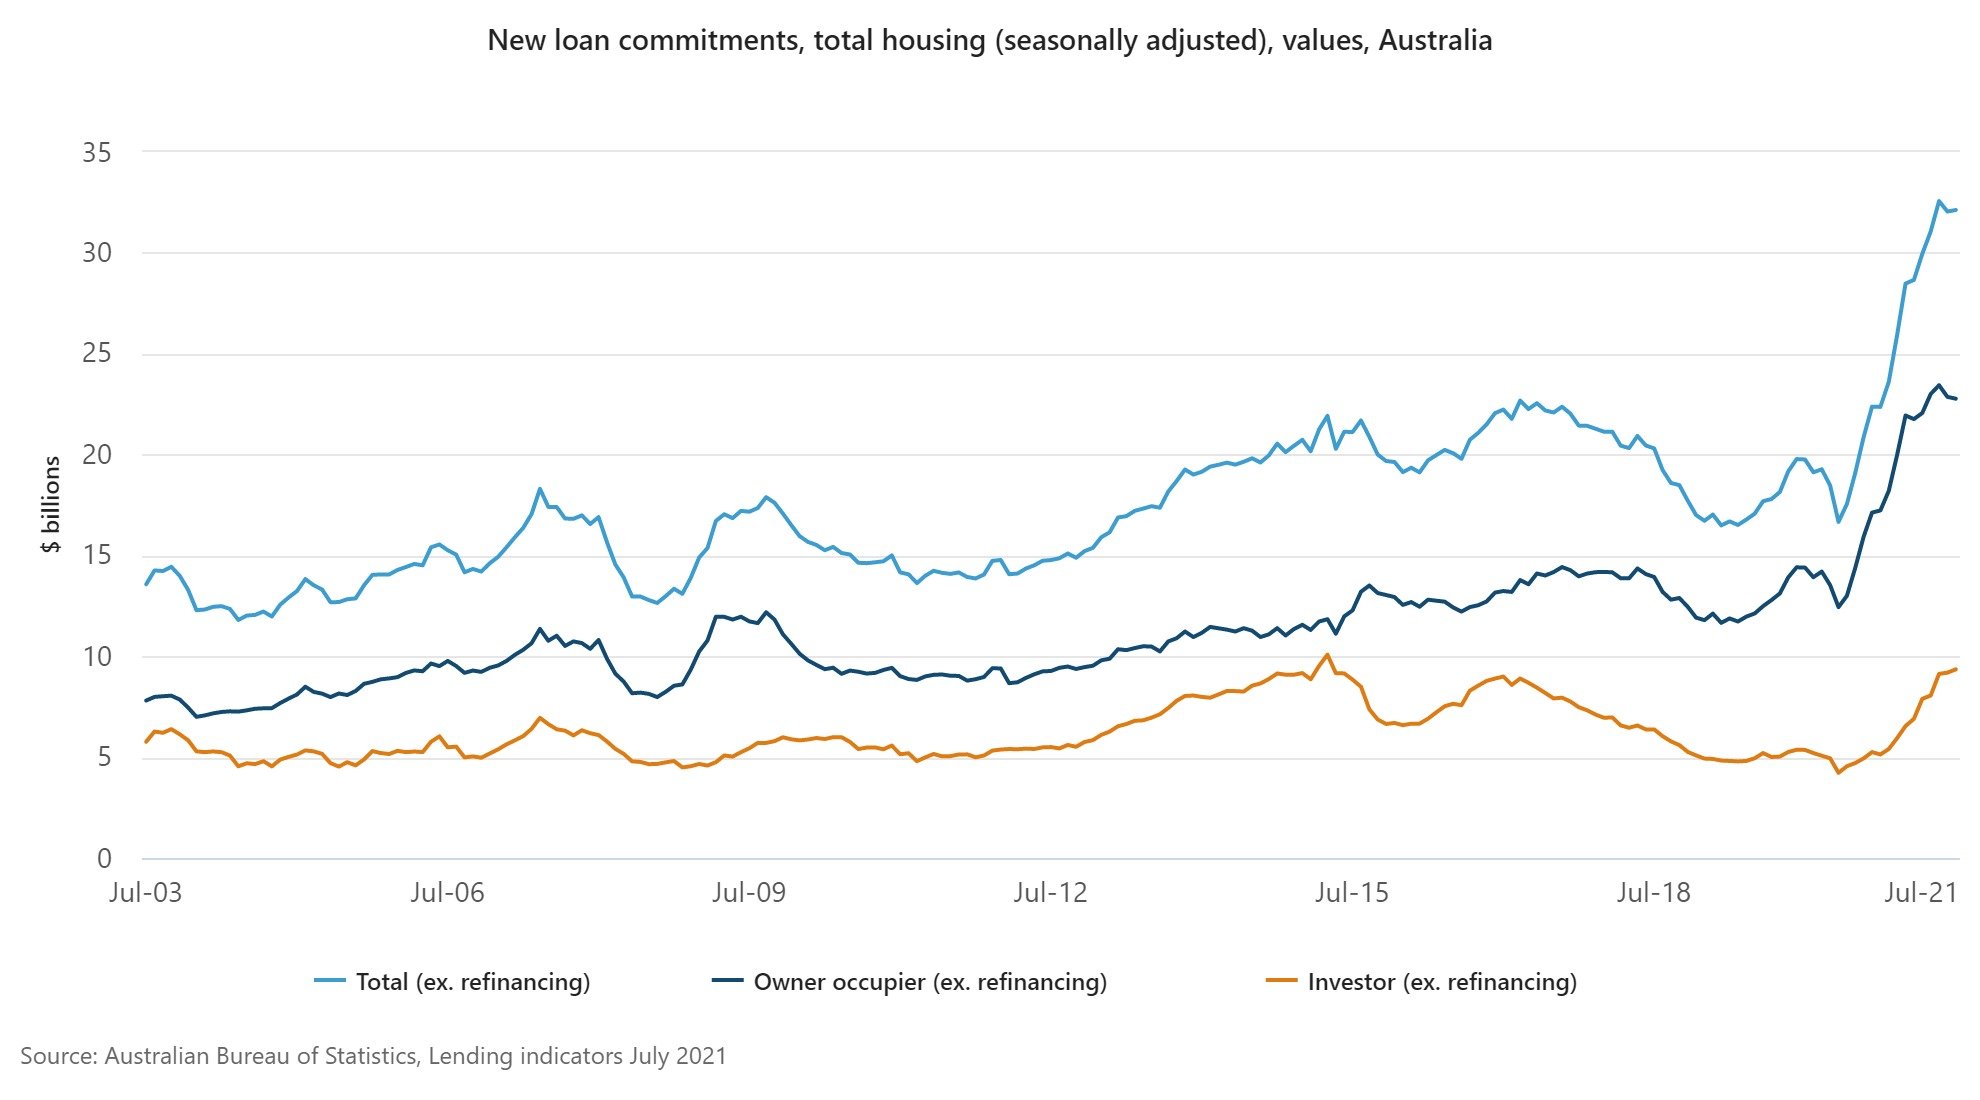 ABS graph shows a dramatic surge in new home loan commitments